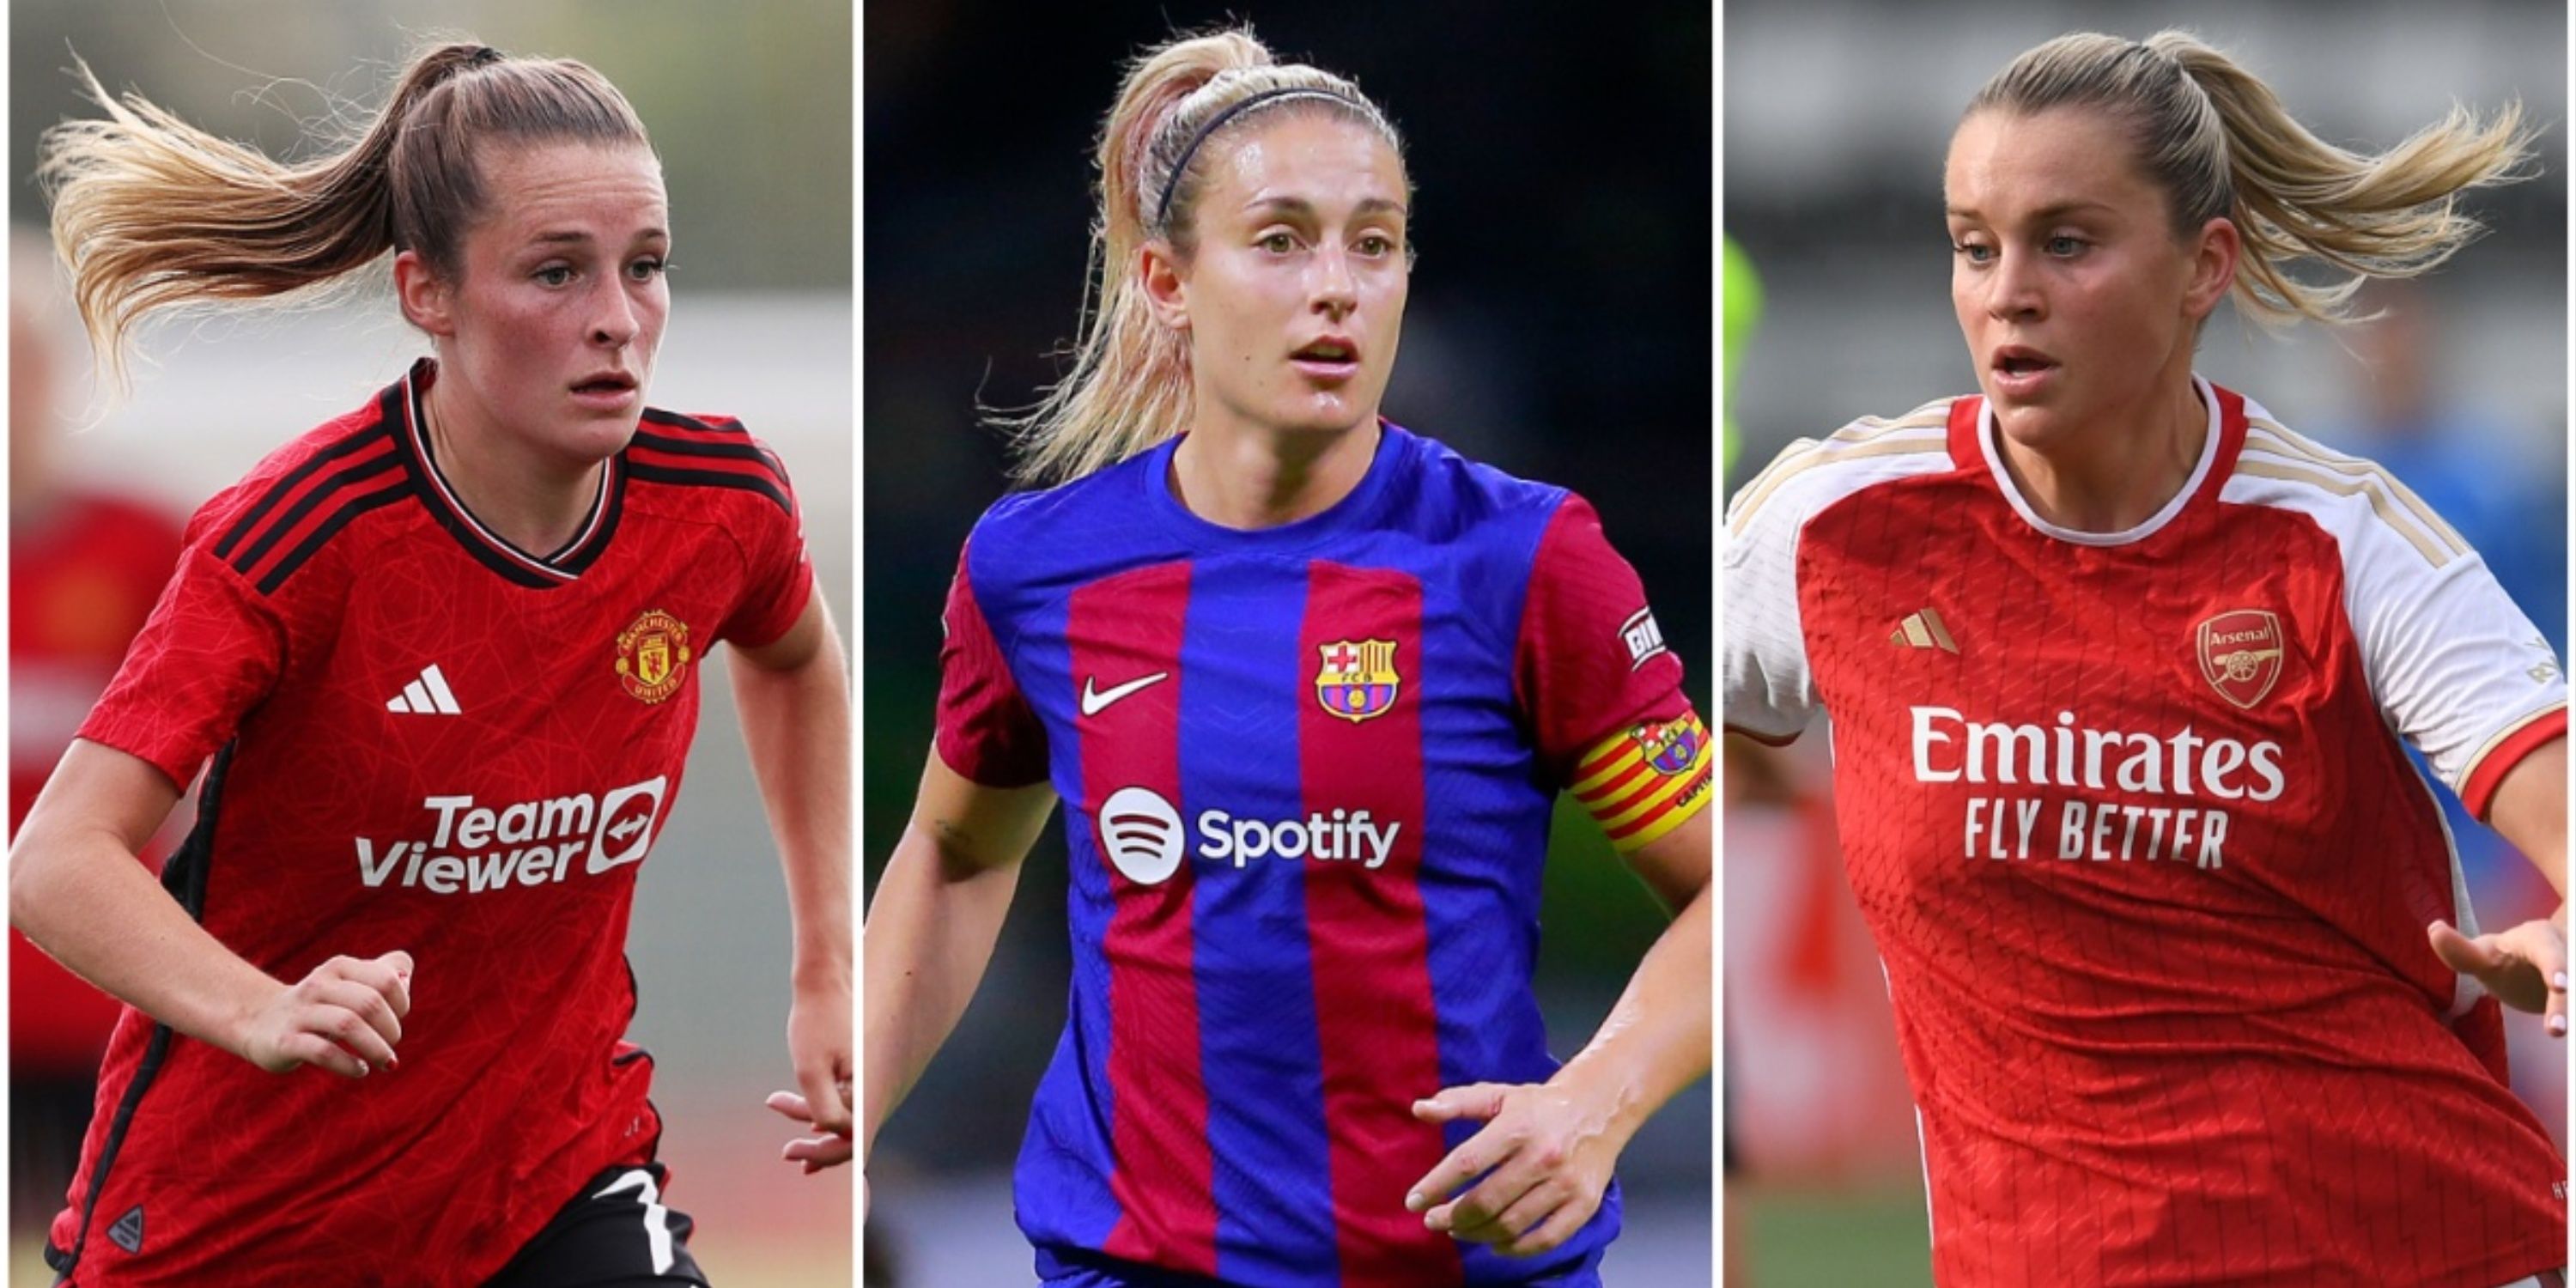 The most valuable squads in women’s football ranked – Arsenal place higher than Chelsea